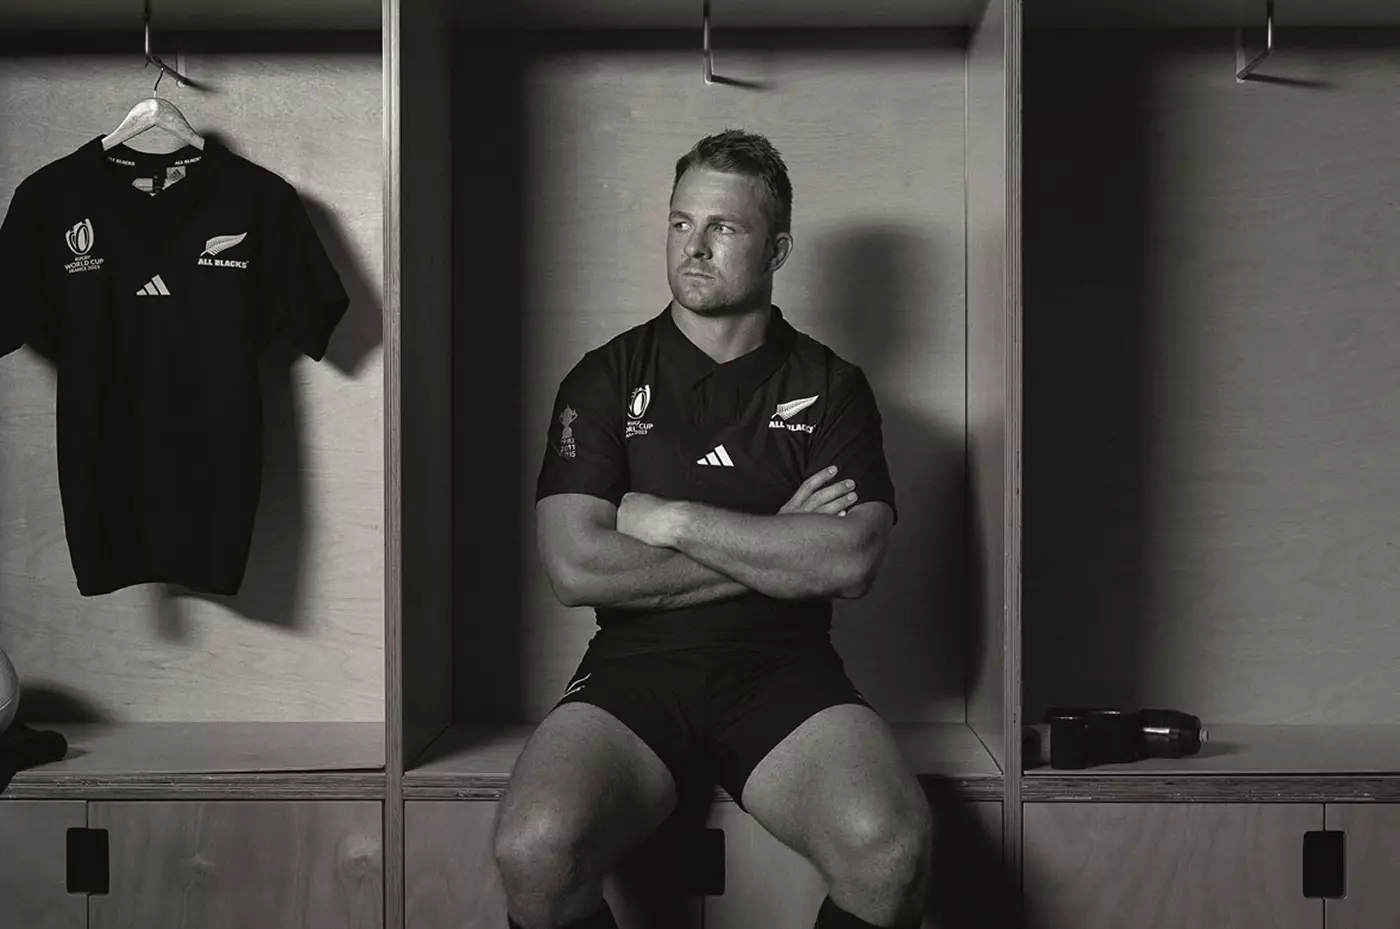 The adidas All Blacks Rugby Kit for the 2023 Rugby World Cup has been revealed